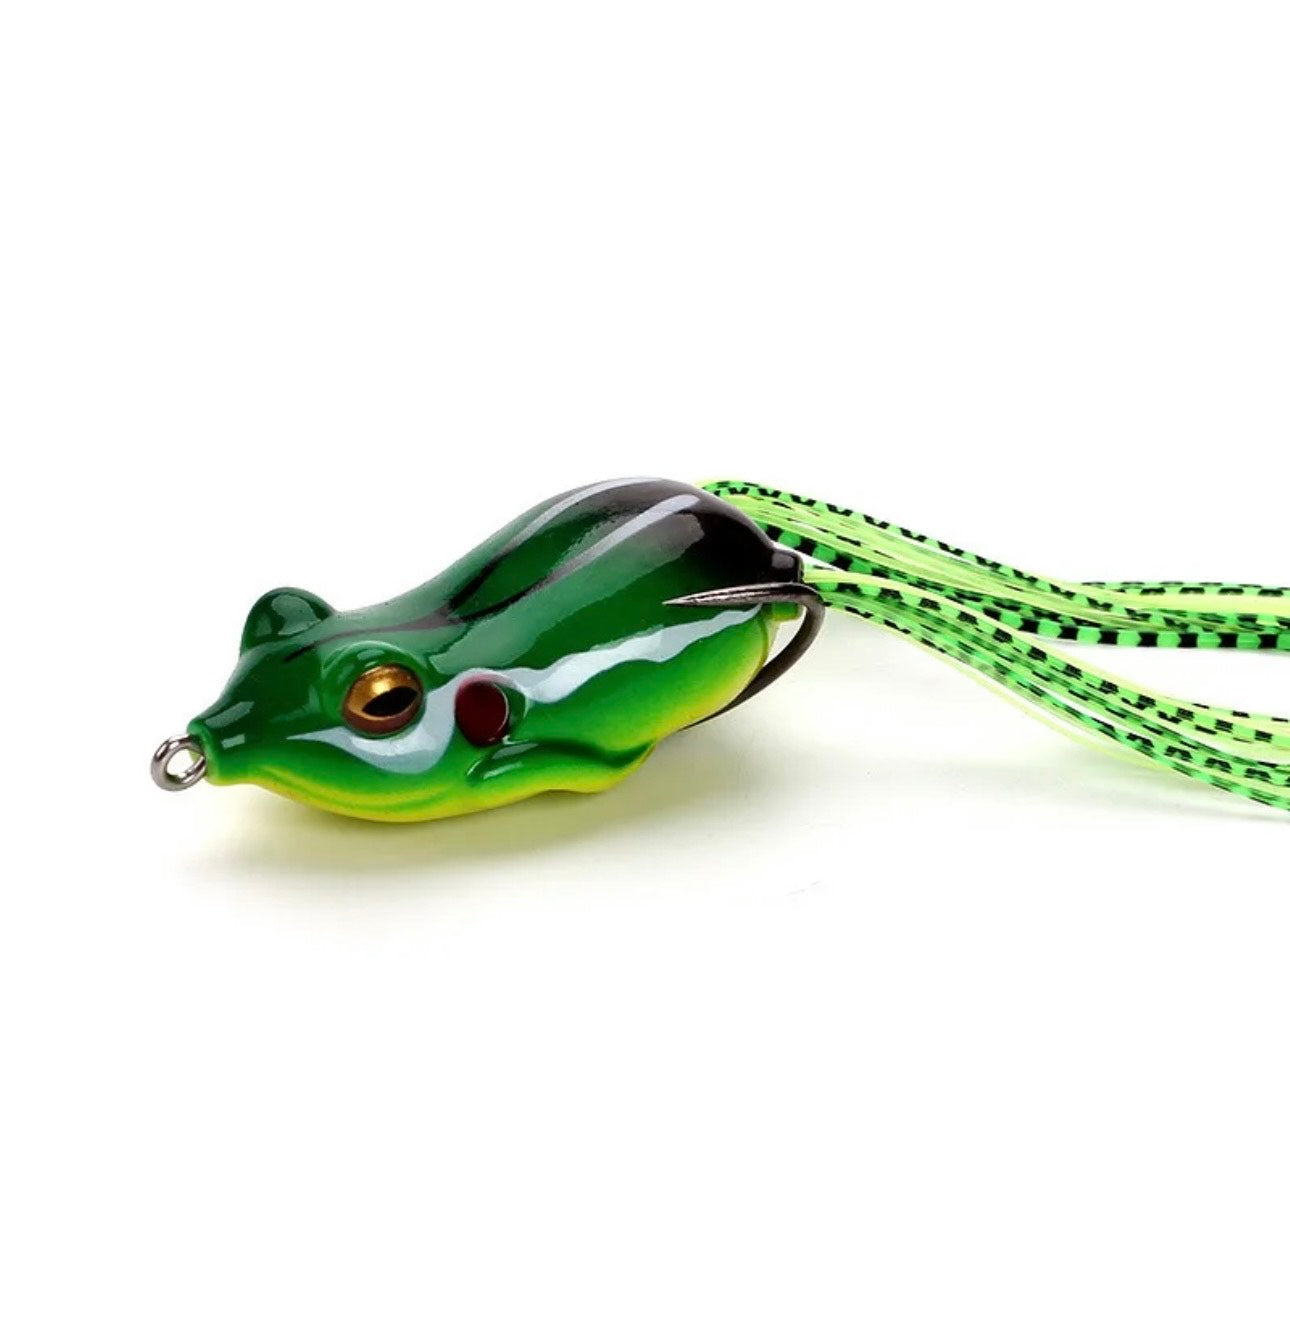 Topwater Frogs – RodBender Fishing Co.